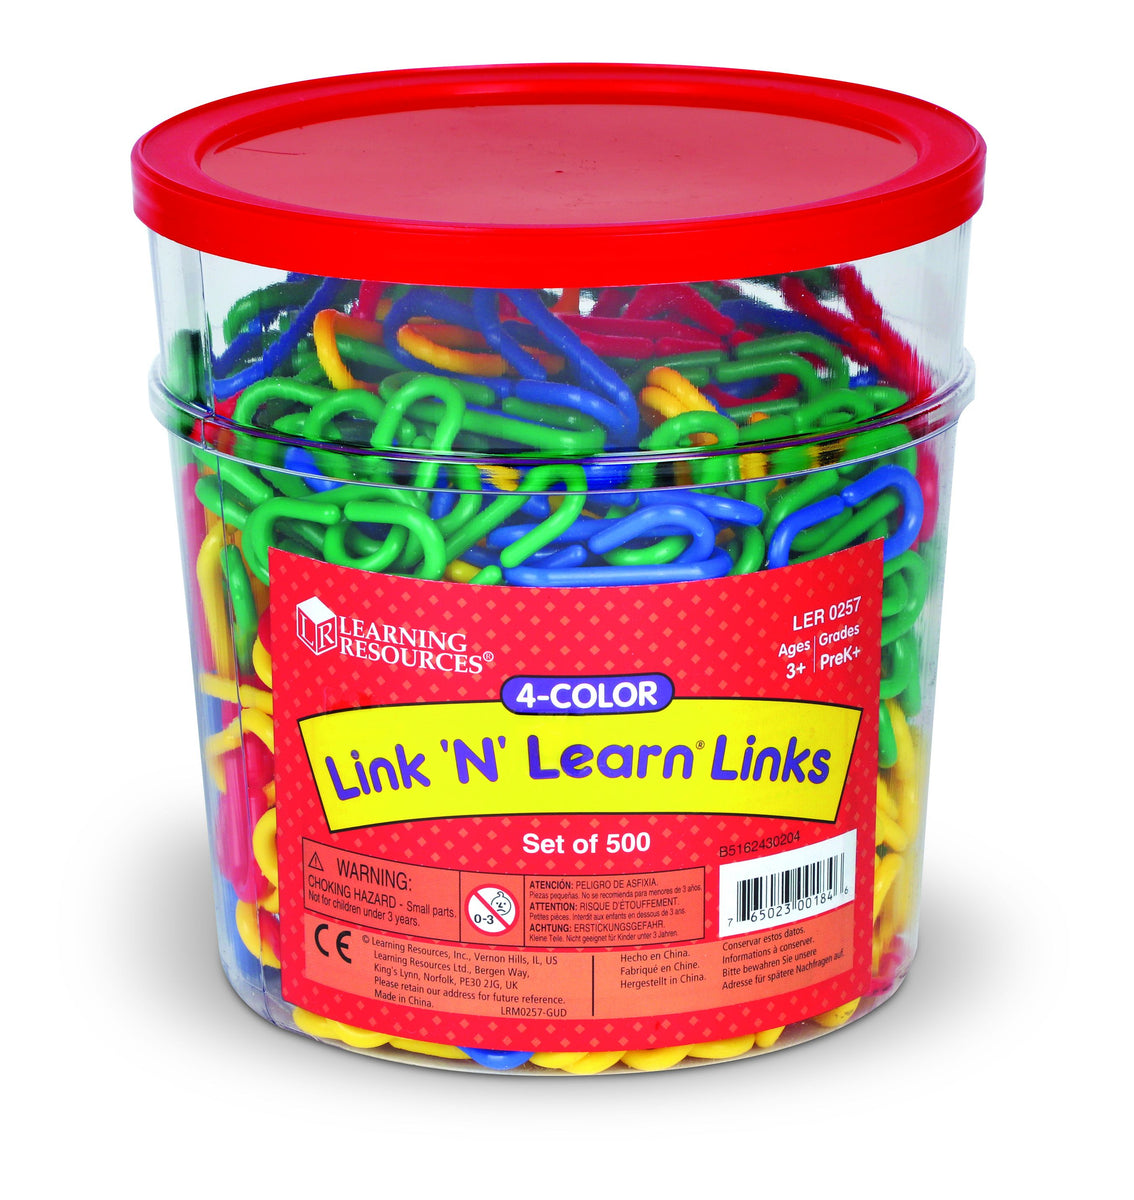 Learning Resources Link 'N' Learn links 500 stuks The Mini Story